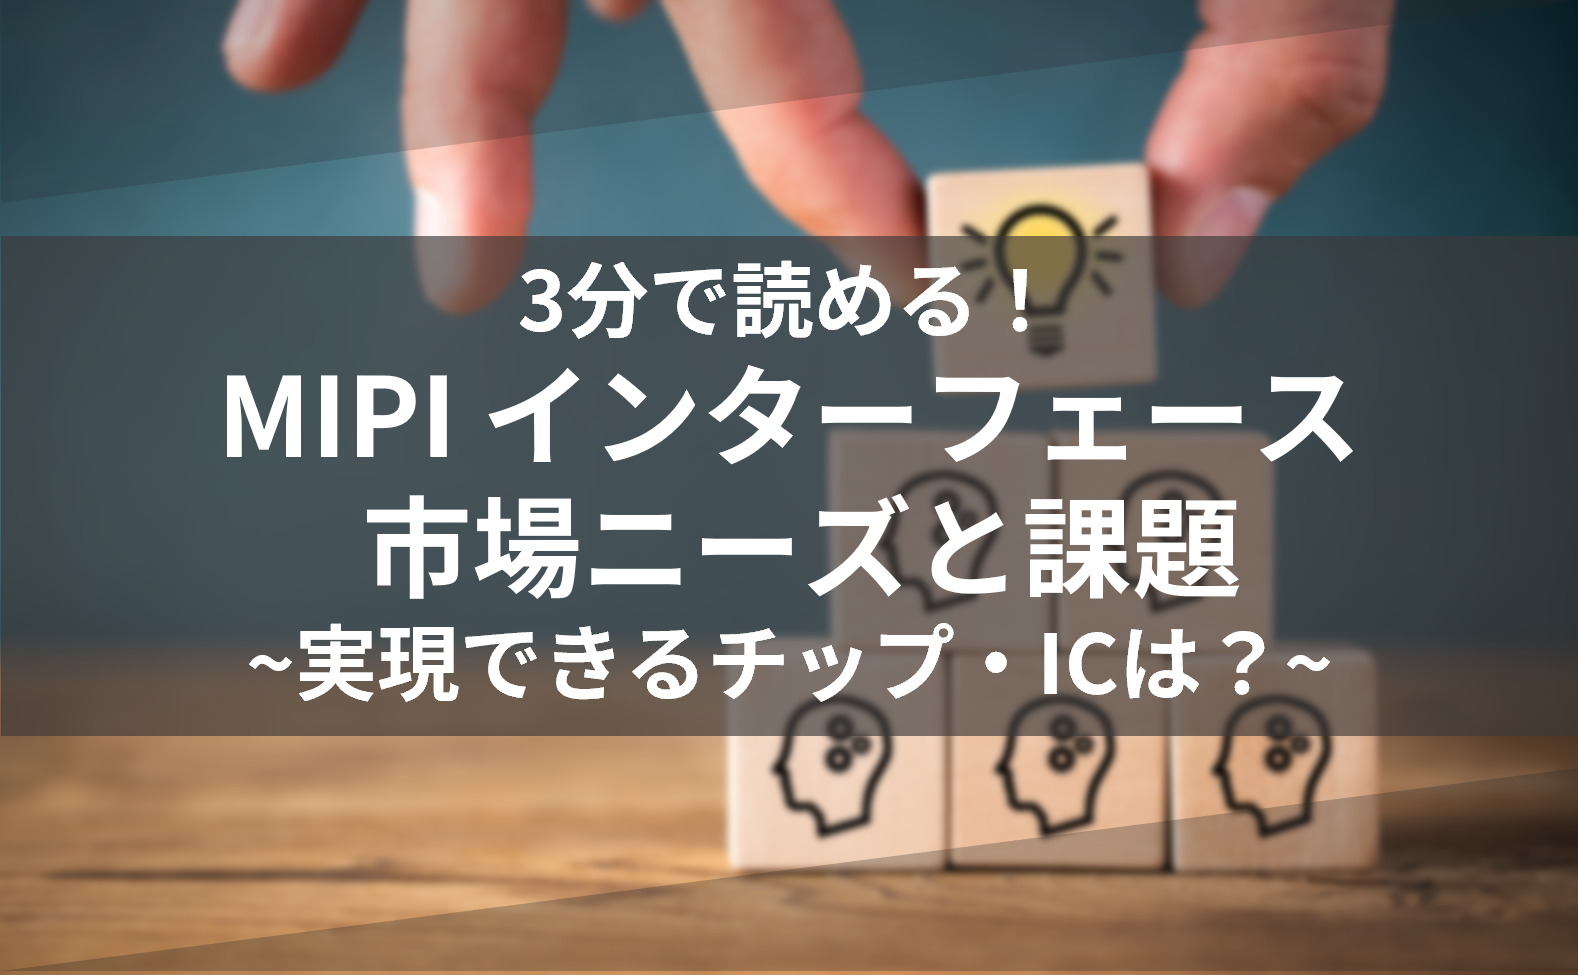 Read in 3 minutes! Market Needs and Challenges for MIPI Interfaces - Which Chips/ICs Can Be Realized? ~